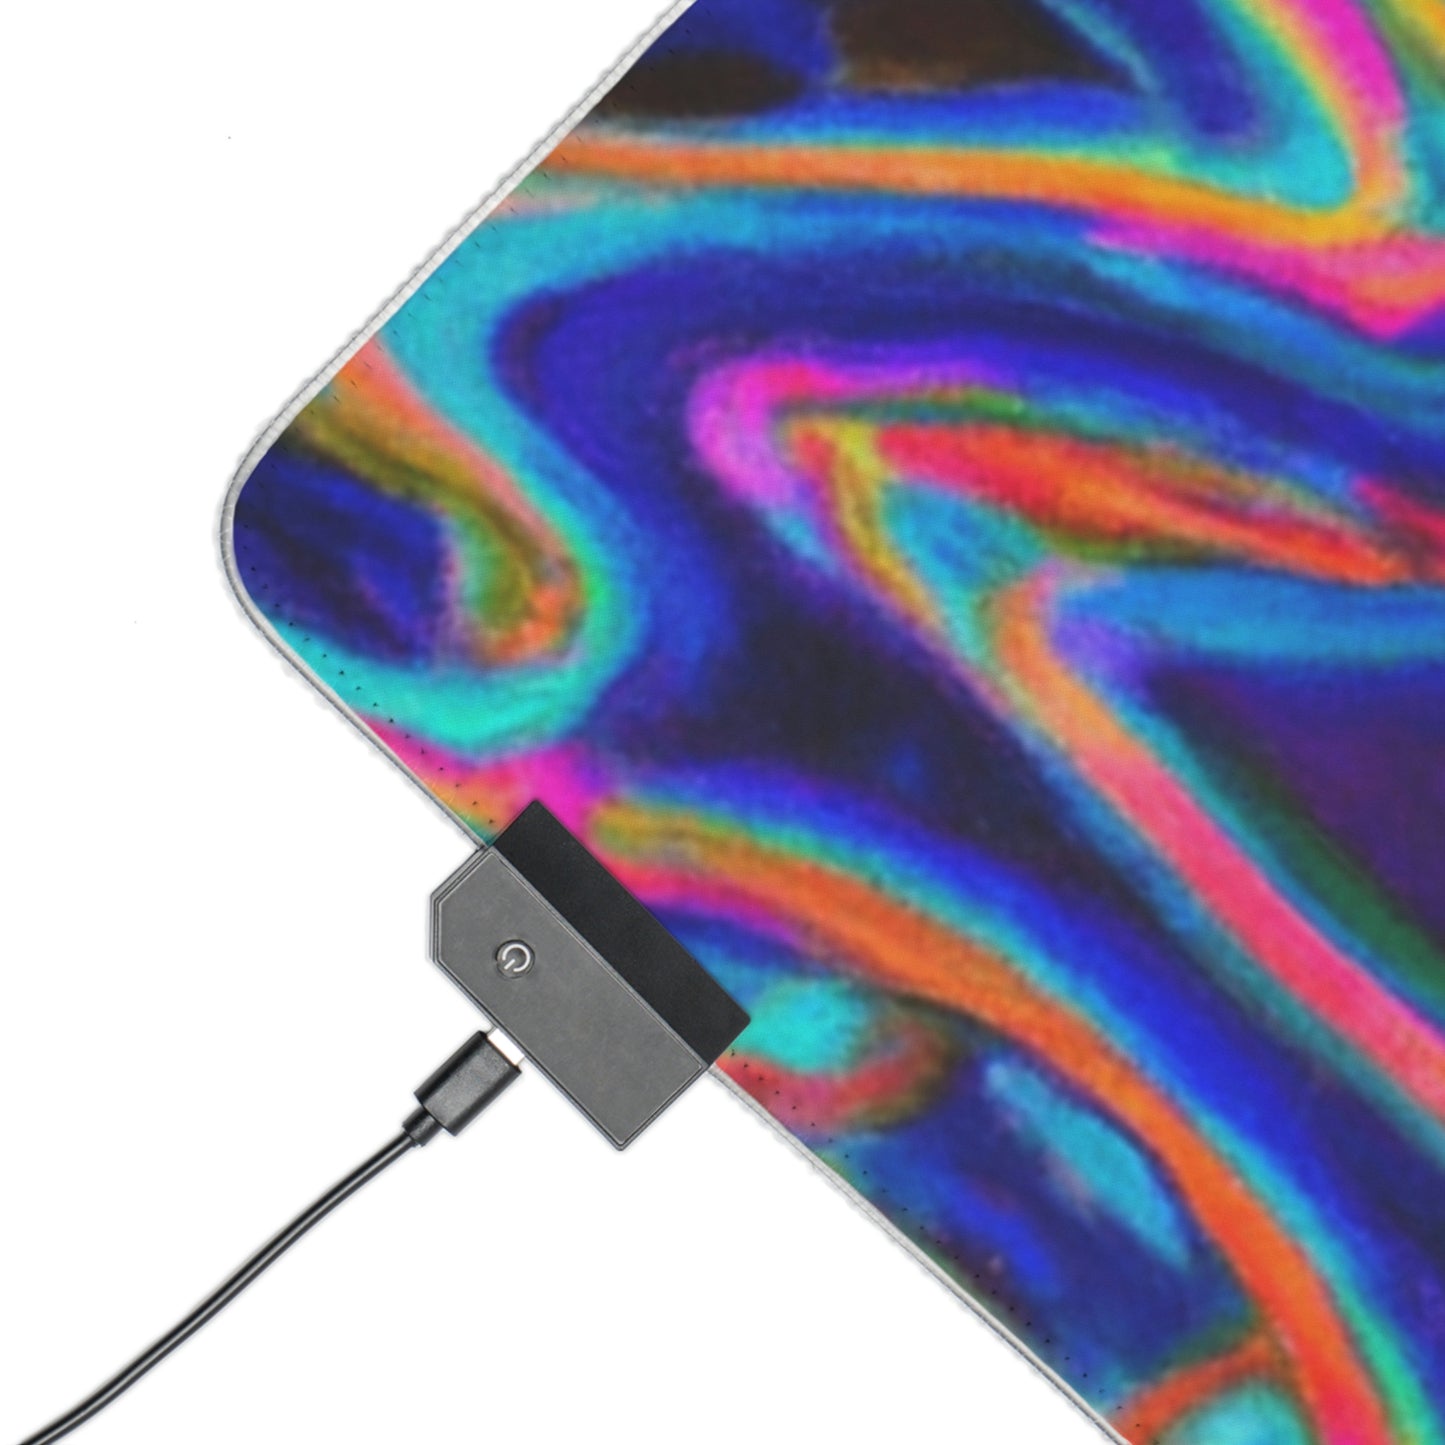 Quazzy McRocketman - Psychedelic Trippy LED Light Up Gaming Mouse Pad